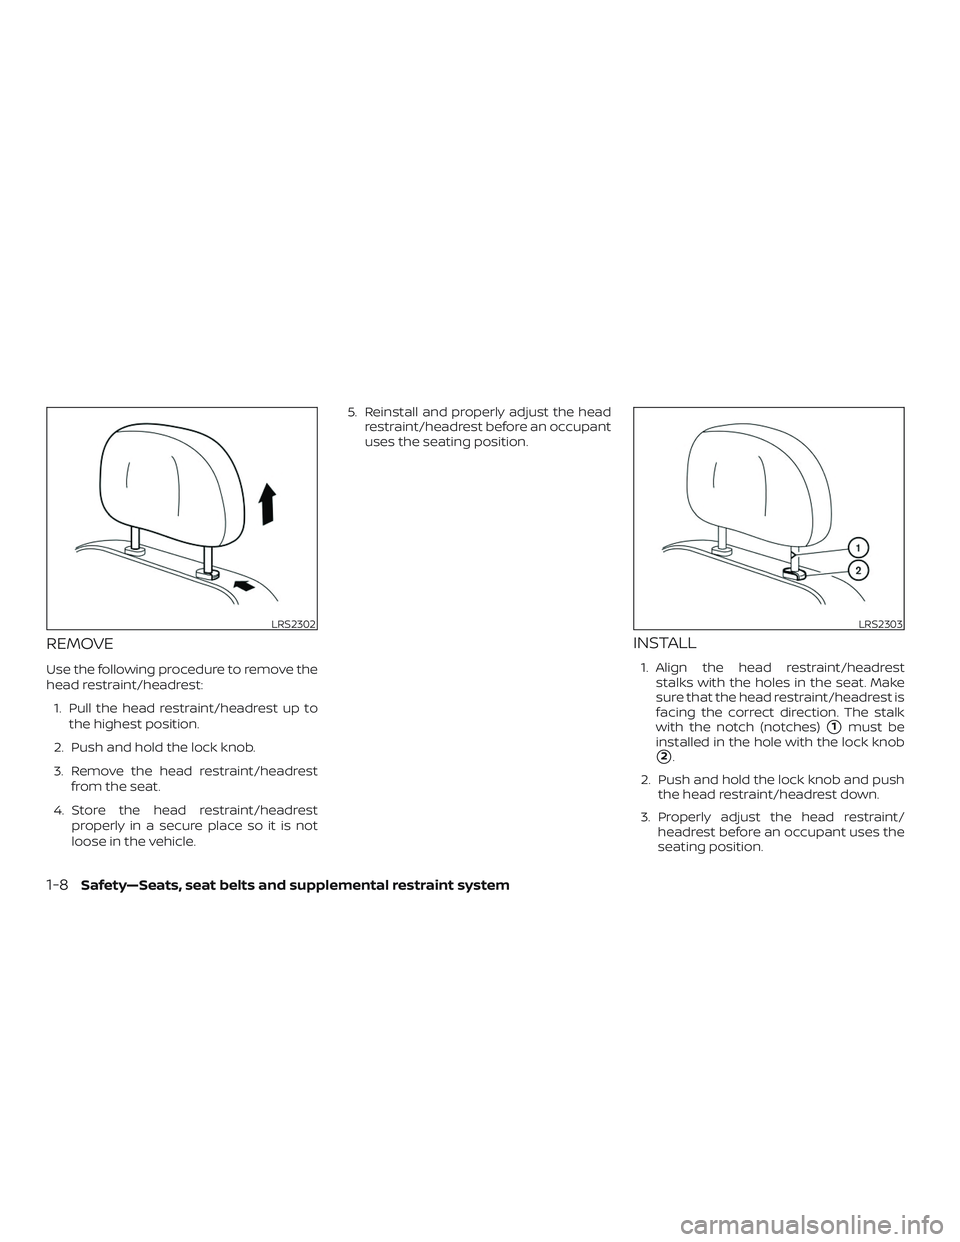 NISSAN VERSA NOTE 2018  Owner´s Manual REMOVE
Use the following procedure to remove the
head restraint/headrest:1. Pull the head restraint/headrest up to the highest position.
2. Push and hold the lock knob.
3. Remove the head restraint/he